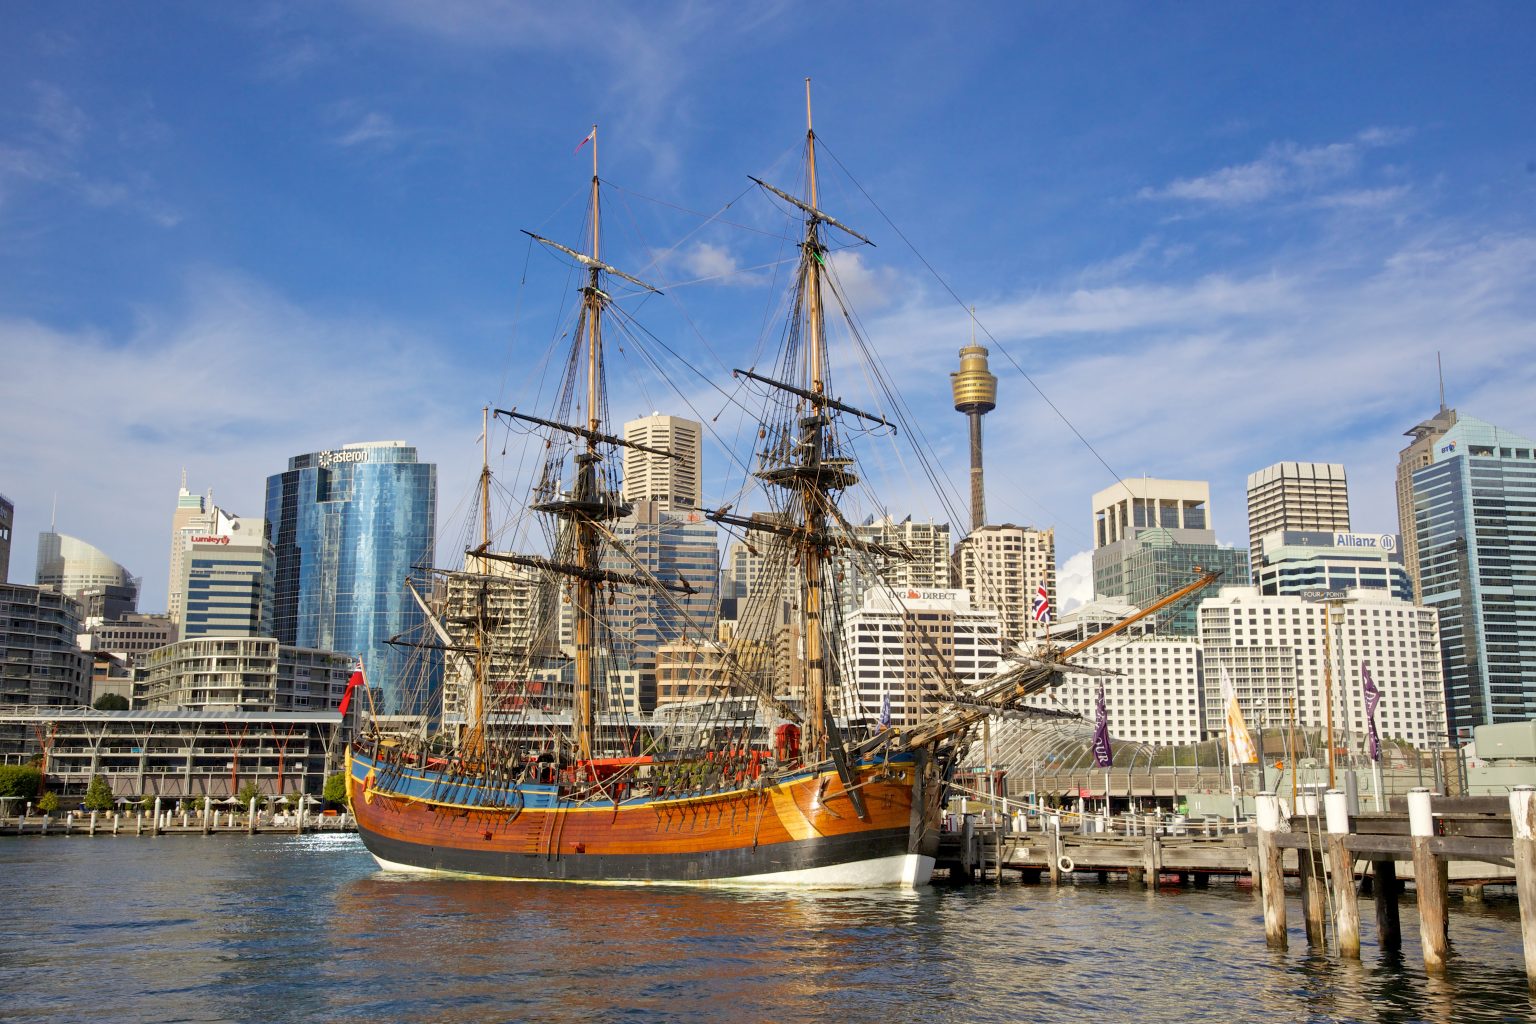 A replica of Captain Cook's HMS Endeavour next to the Australian National Maritime Museum in Sydney. Credit: DepositPhotos